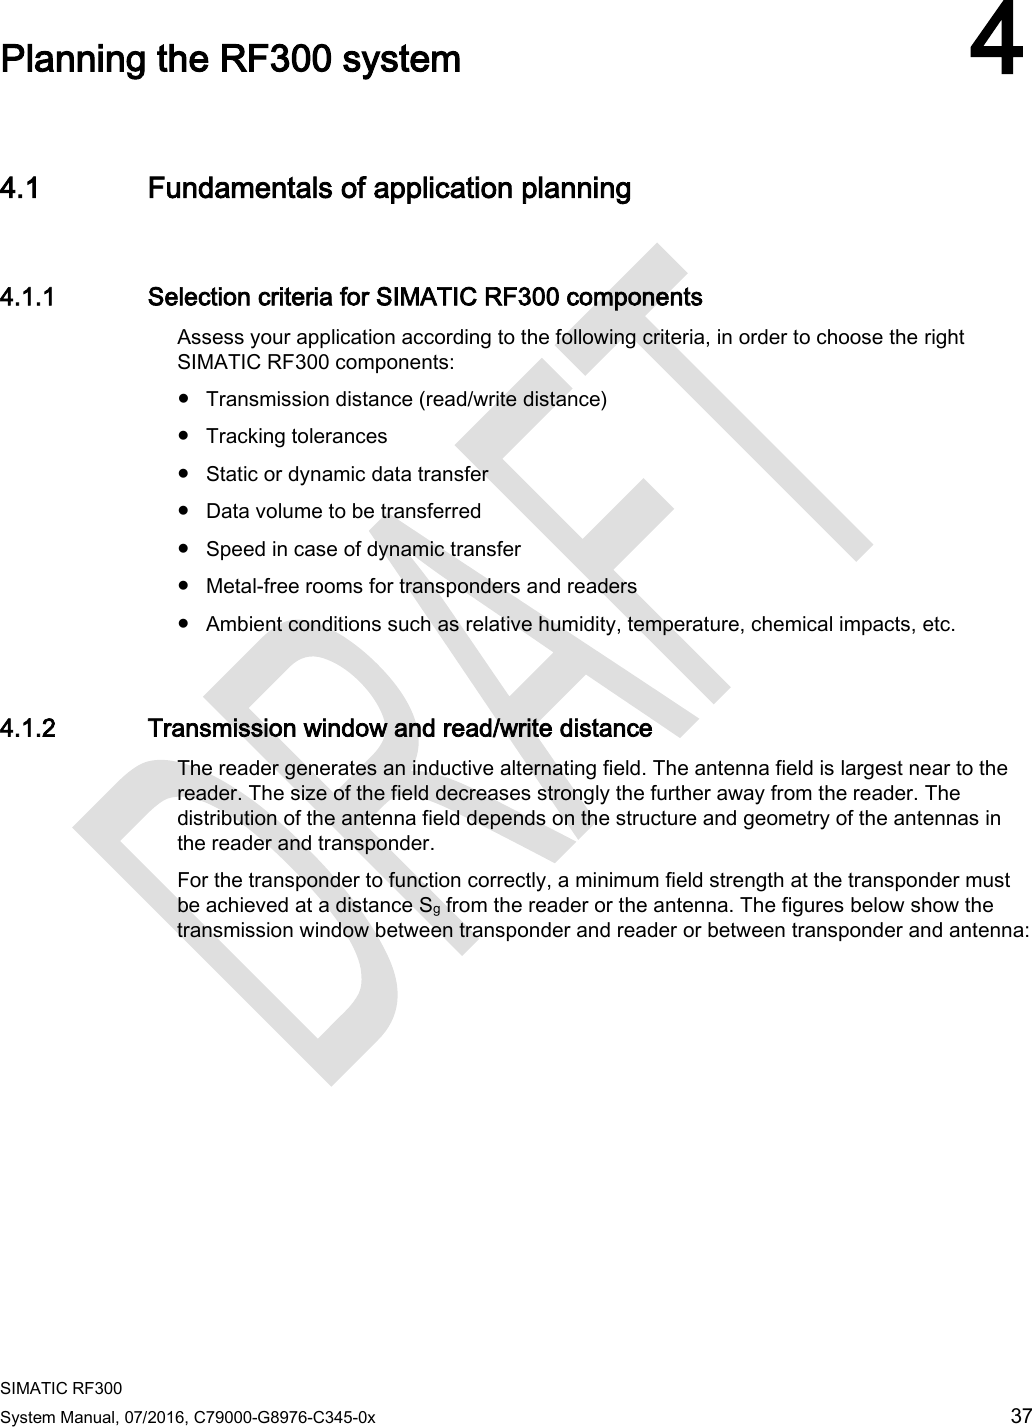  SIMATIC RF300 System Manual, 07/2016, C79000-G8976-C345-0x 37  Planning the RF300 system 4 4.1 Fundamentals of application planning 4.1.1 Selection criteria for SIMATIC RF300 components Assess your application according to the following criteria, in order to choose the right SIMATIC RF300 components:  ● Transmission distance (read/write distance) ● Tracking tolerances ● Static or dynamic data transfer ● Data volume to be transferred ● Speed in case of dynamic transfer ● Metal-free rooms for transponders and readers ● Ambient conditions such as relative humidity, temperature, chemical impacts, etc. 4.1.2 Transmission window and read/write distance The reader generates an inductive alternating field. The antenna field is largest near to the reader. The size of the field decreases strongly the further away from the reader. The distribution of the antenna field depends on the structure and geometry of the antennas in the reader and transponder.  For the transponder to function correctly, a minimum field strength at the transponder must be achieved at a distance Sg from the reader or the antenna. The figures below show the transmission window between transponder and reader or between transponder and antenna: 